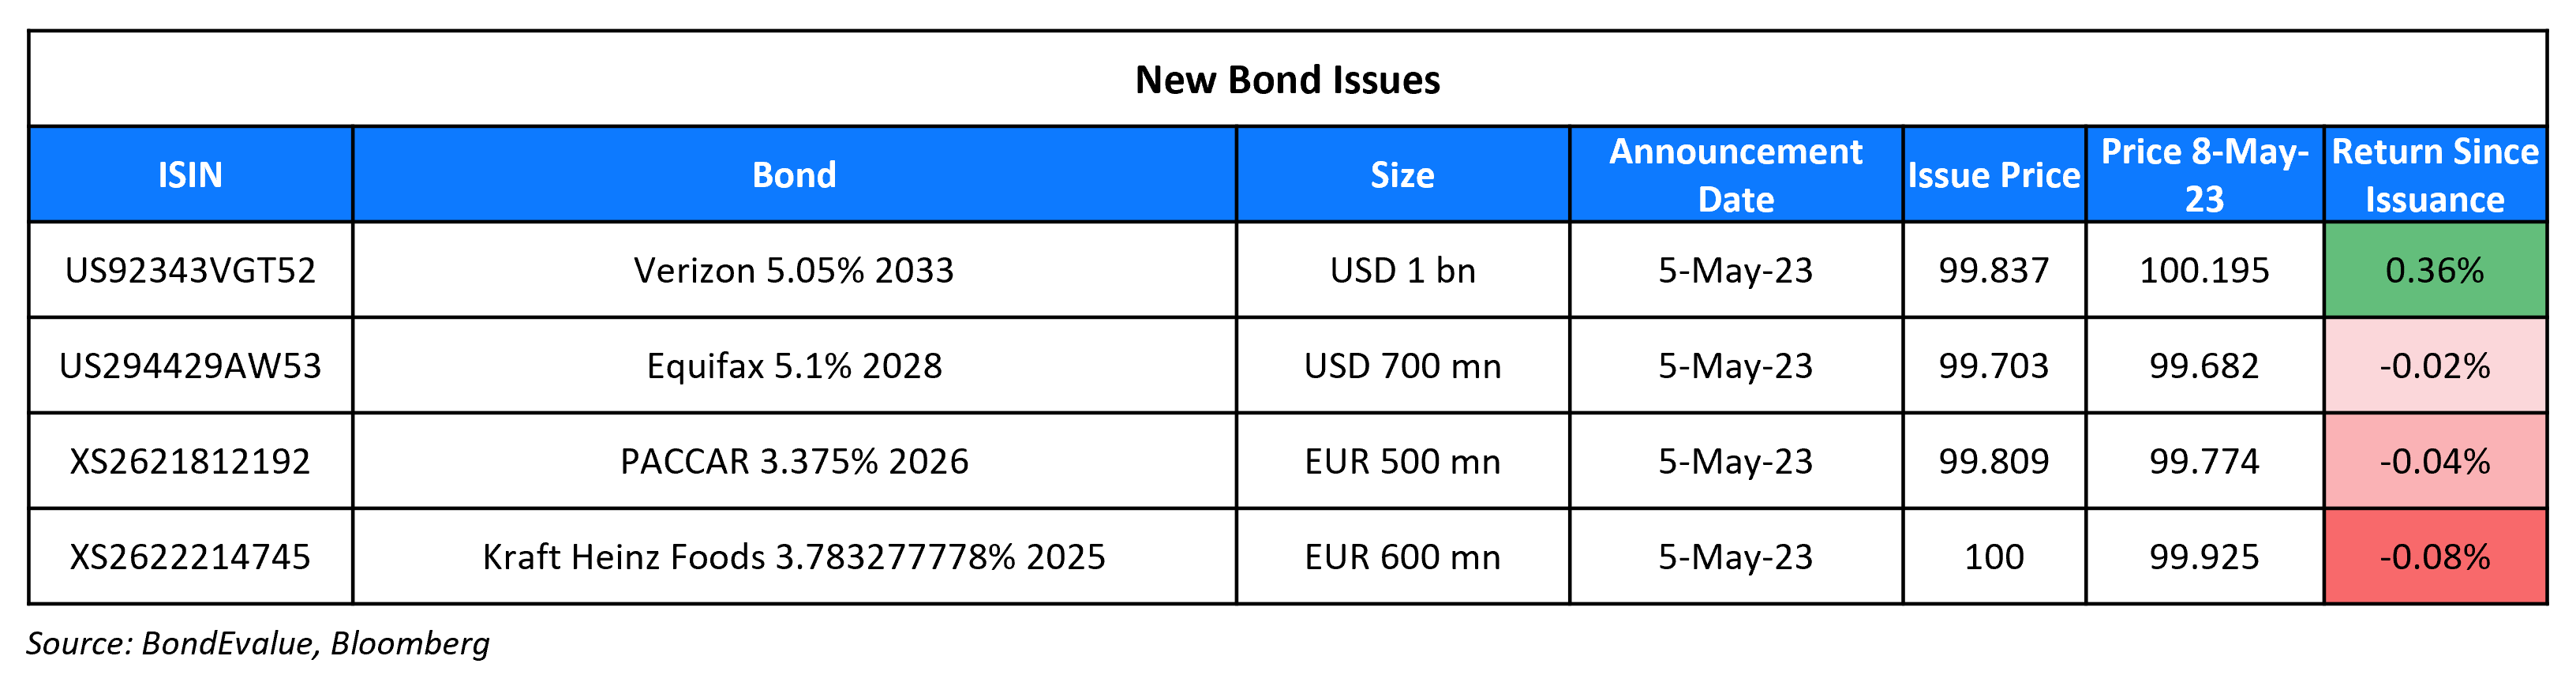 New Bond Issues 8 May 23